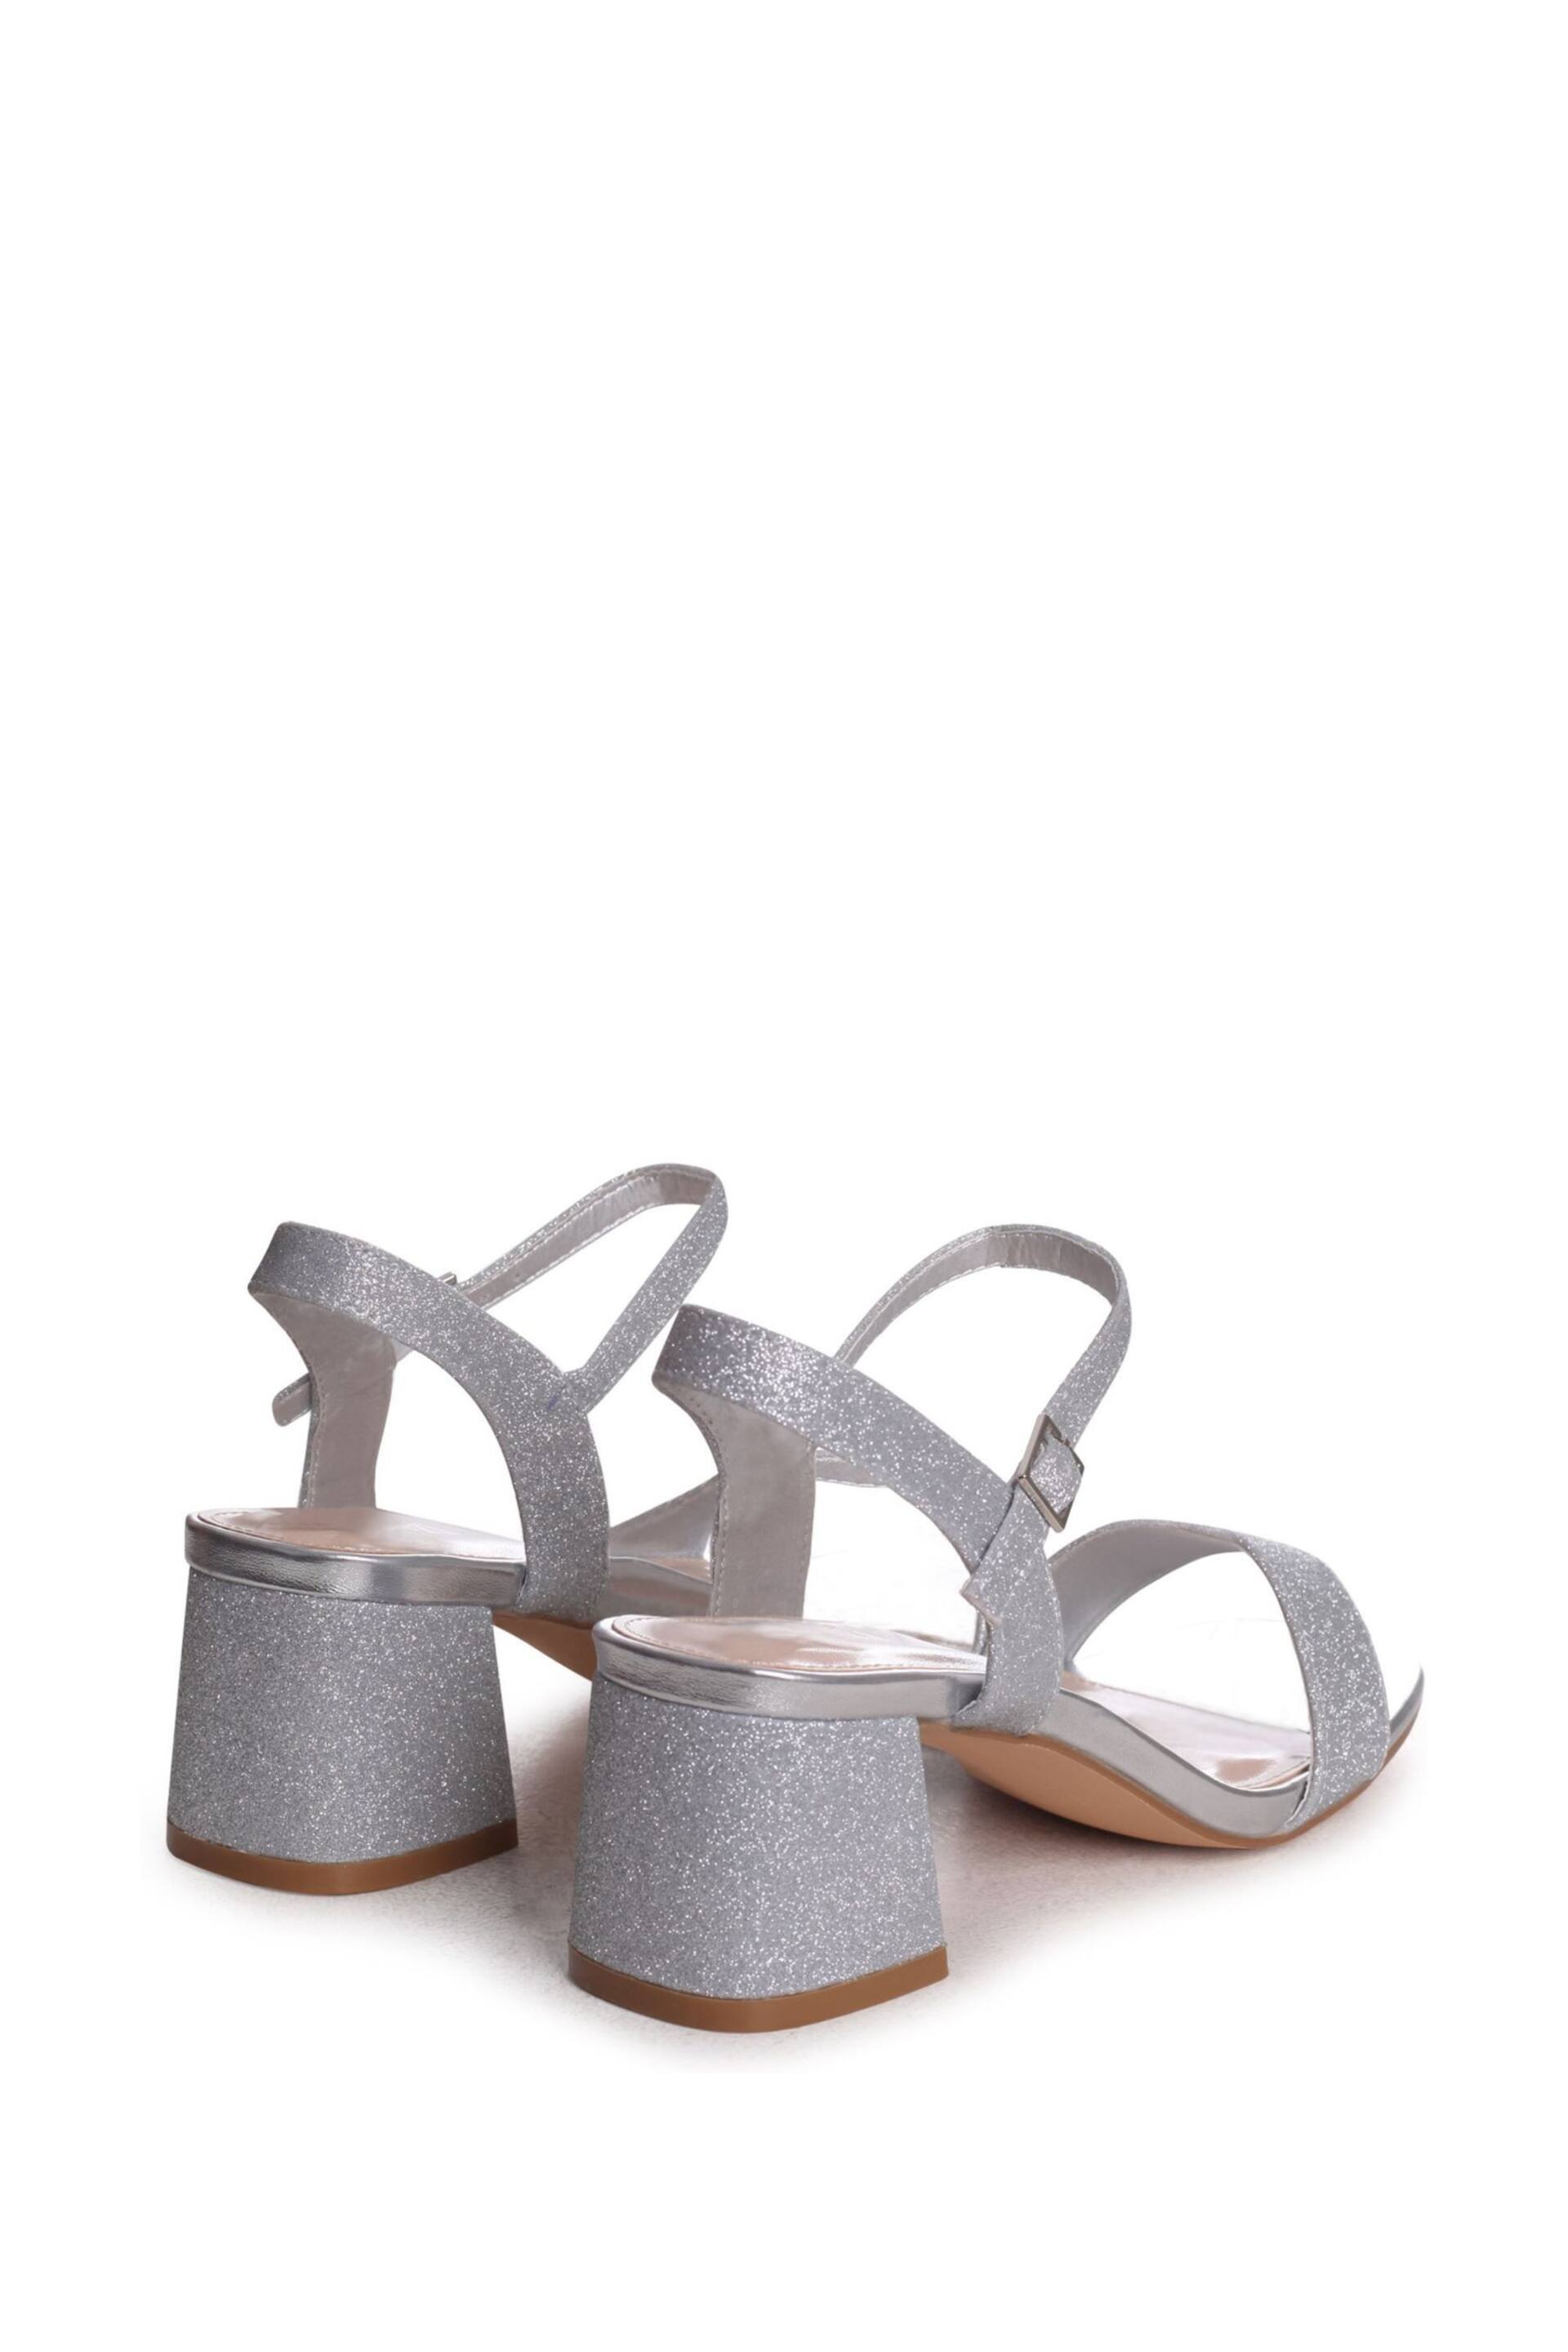 Linzi Silver Glitter Darcie Barely There Block Heeled Sandals - Image 4 of 4